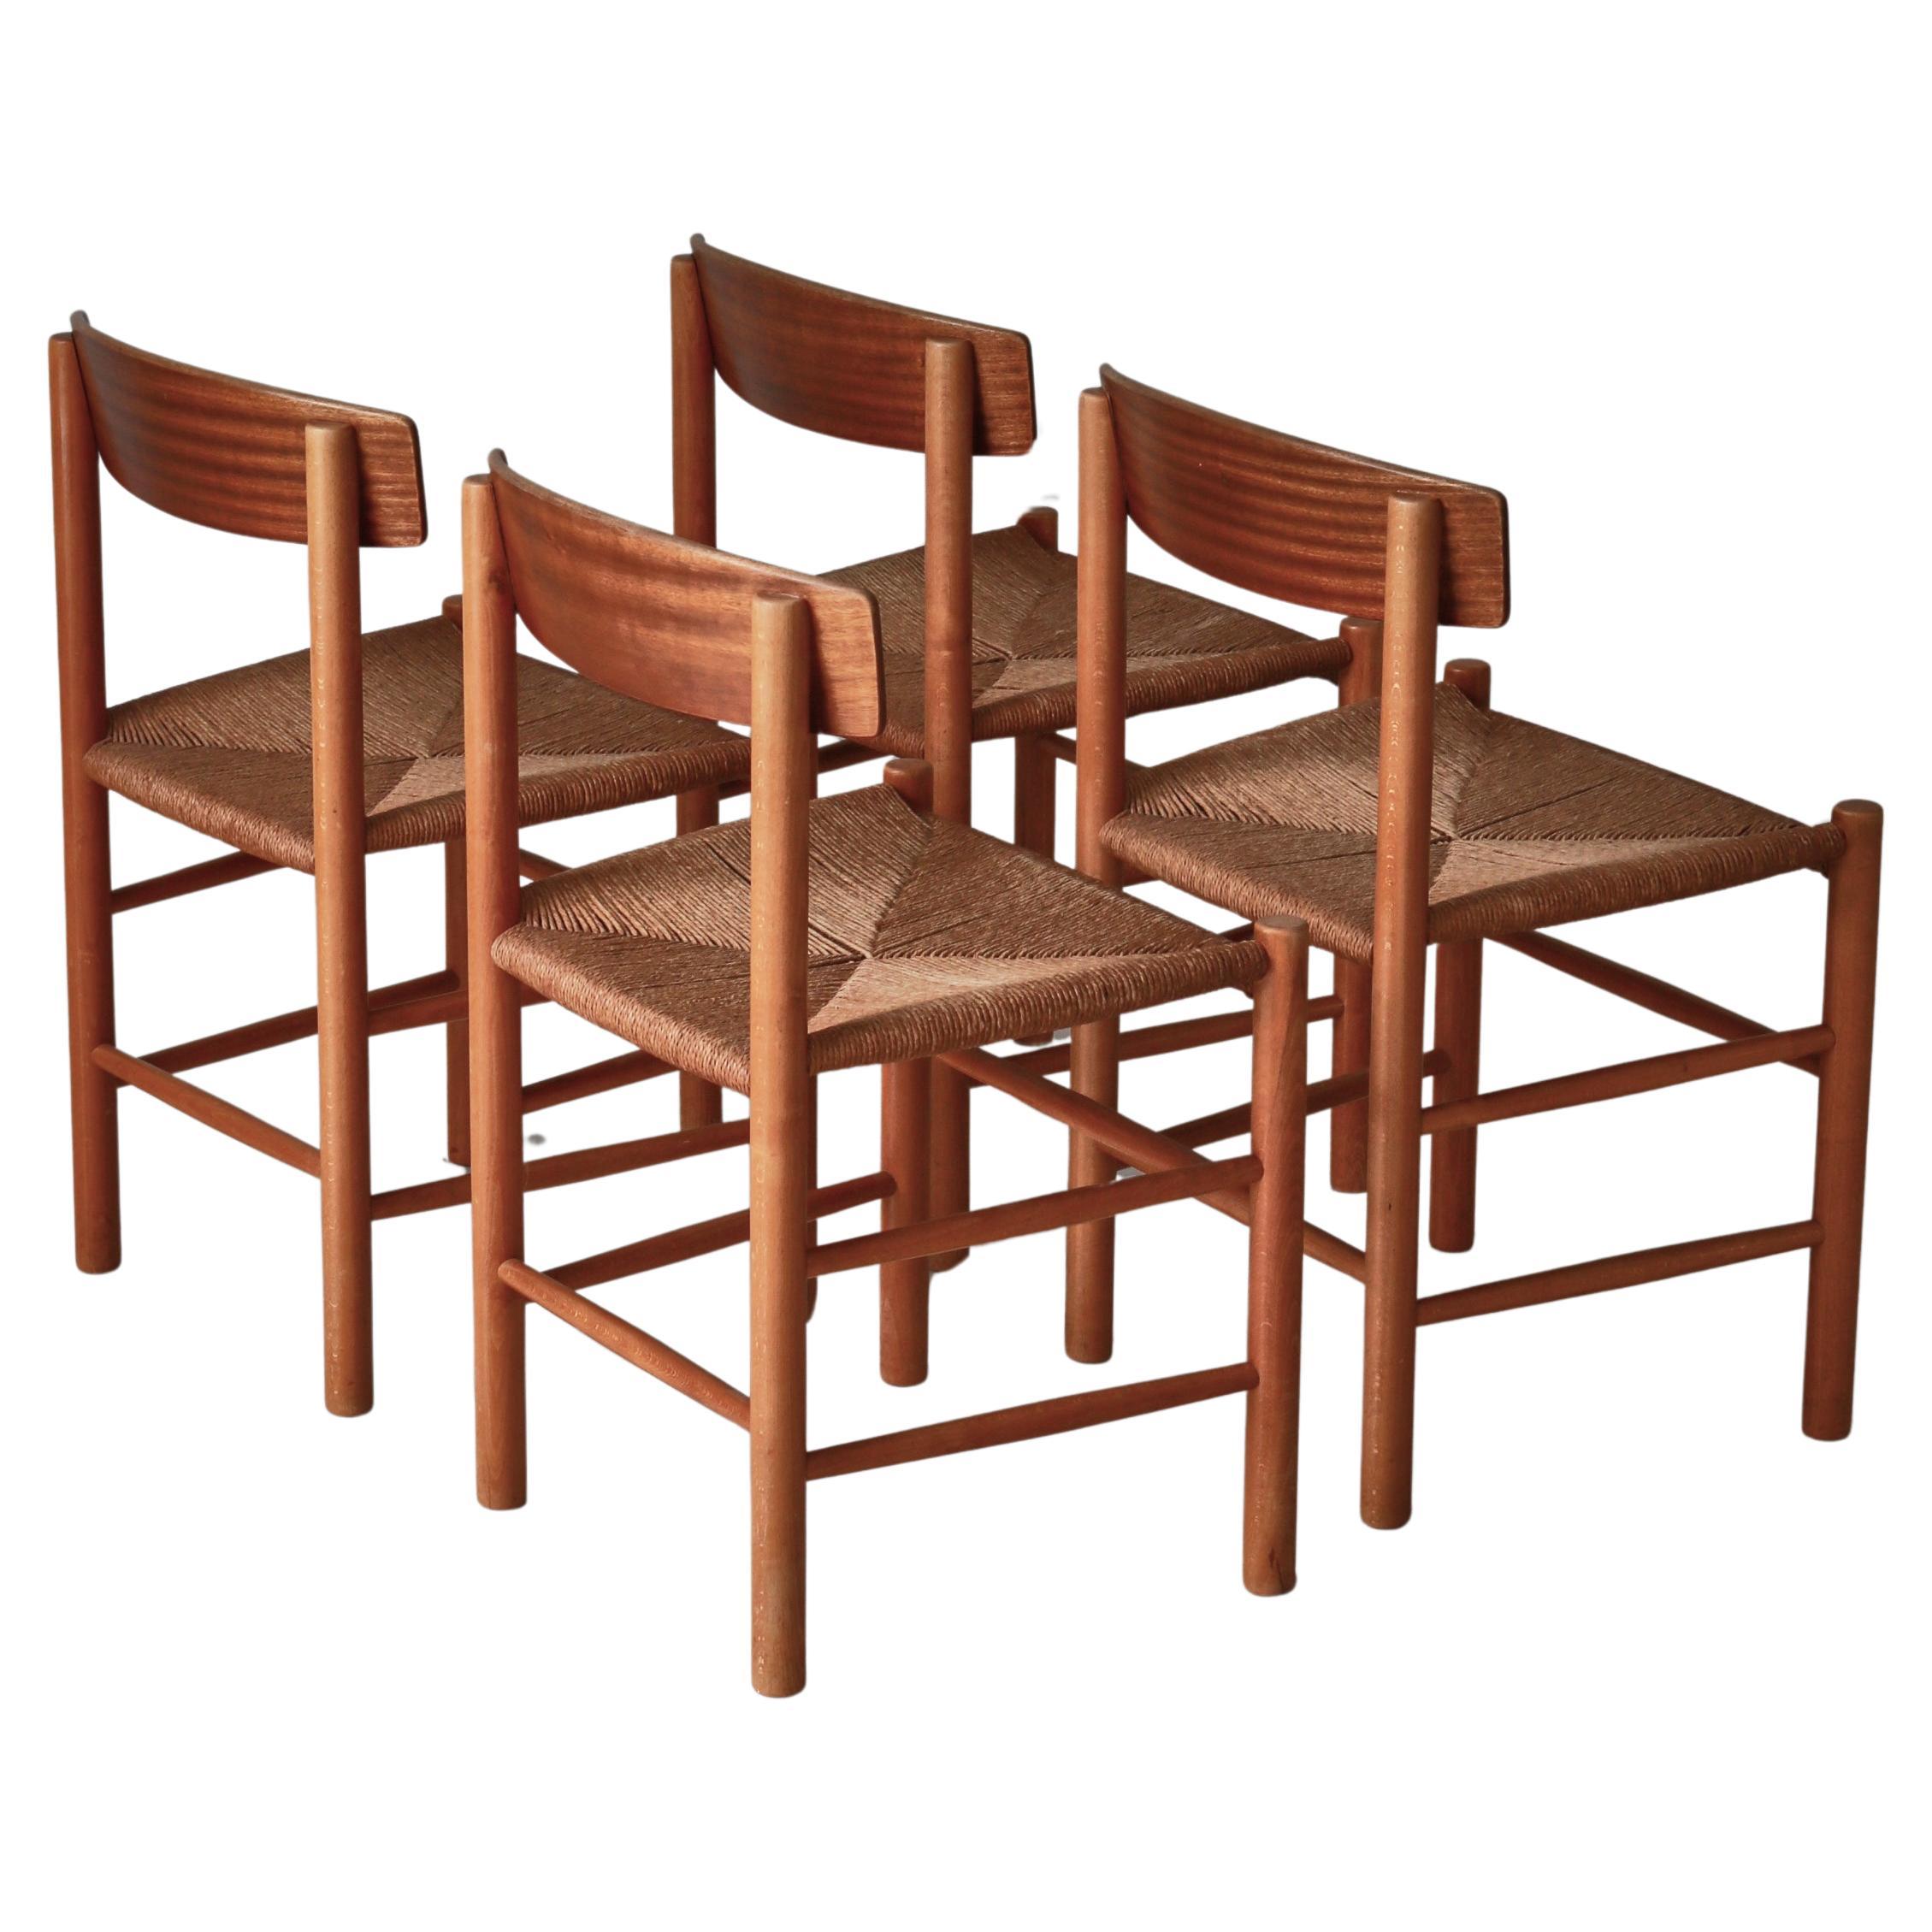 Early set of "People's chairs" by Børge Mogensen, Beech & Mahogany, 1940s For Sale